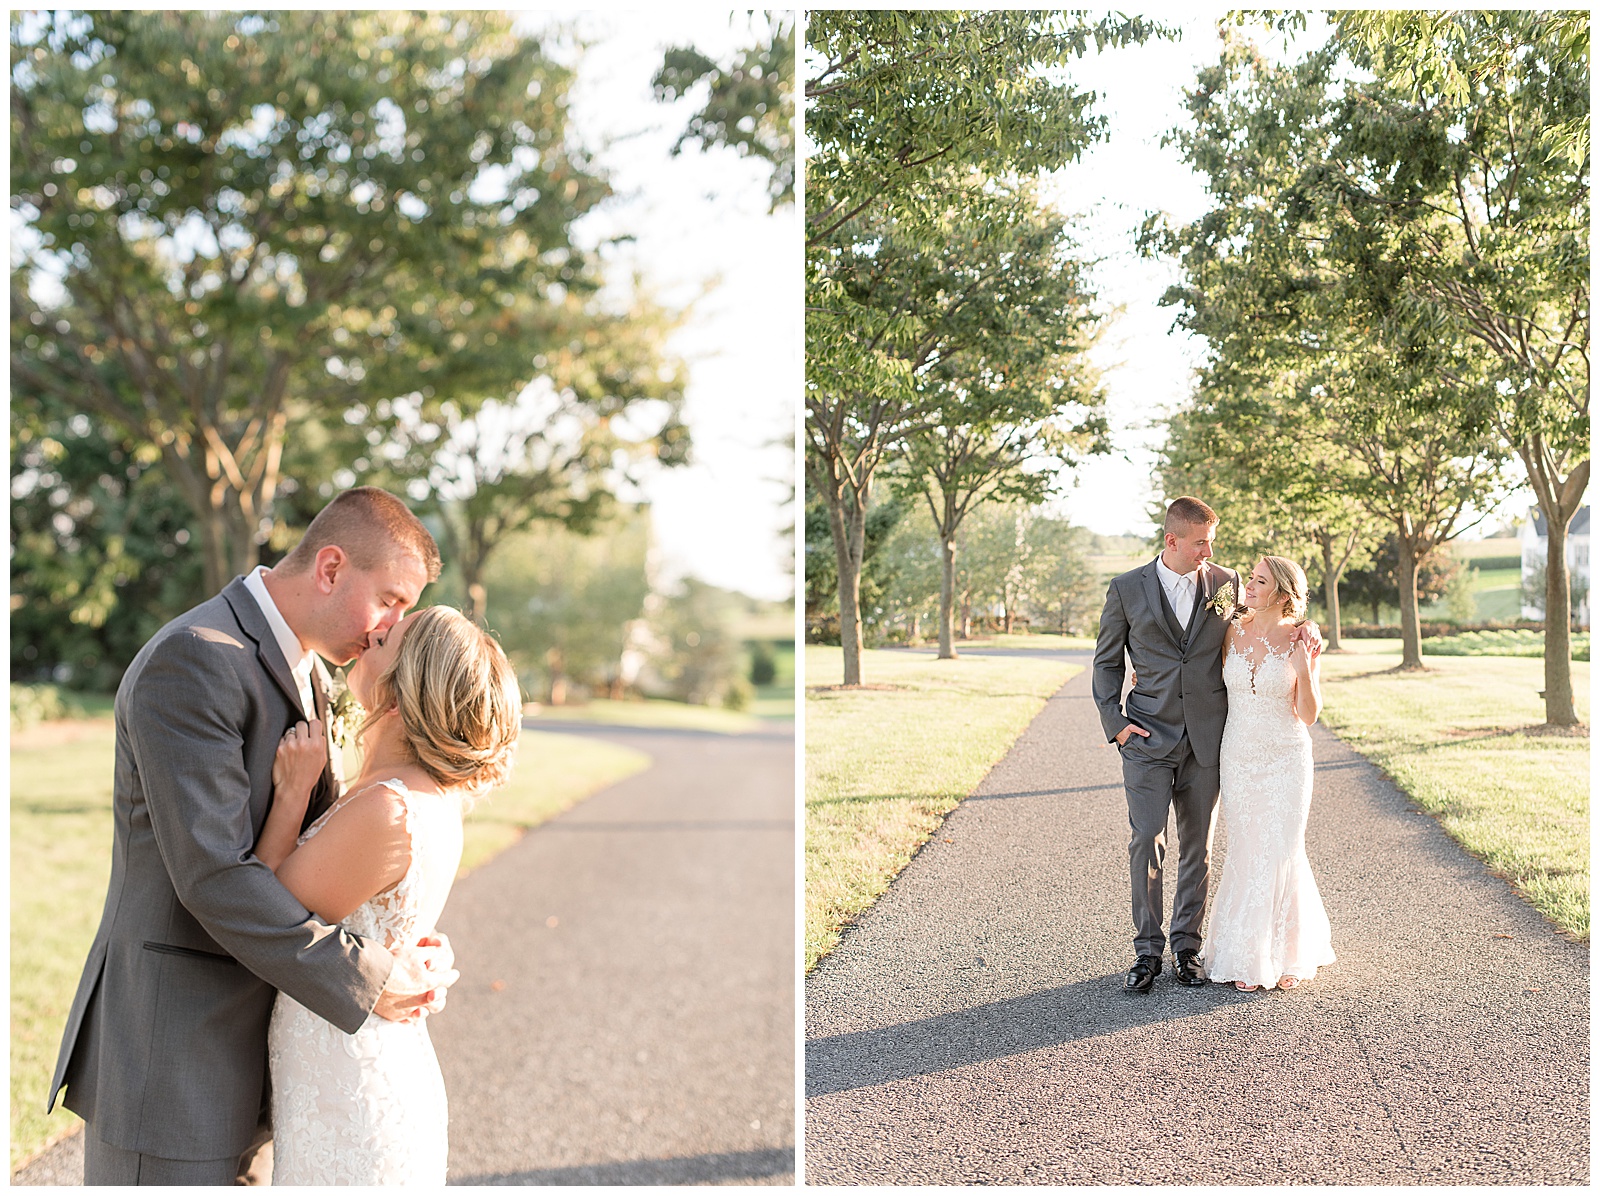 the groom is on the left and the bride is on the right close up on the left side of the photo facing each other and hugging tightly while kissing and standing on the paved pathway with trees in the background on a sunny day at Lakefield Weddings in Manheim, PA, the couple is standing in the center of the paved path with trees along the path and the groom on the left with his right hand in his pocket and the bride on the right with her arm around him and her left hand touching his on her left shoulder while they look at each other and smile on a sunny day at Lakefield Weddings in Manheim, PA